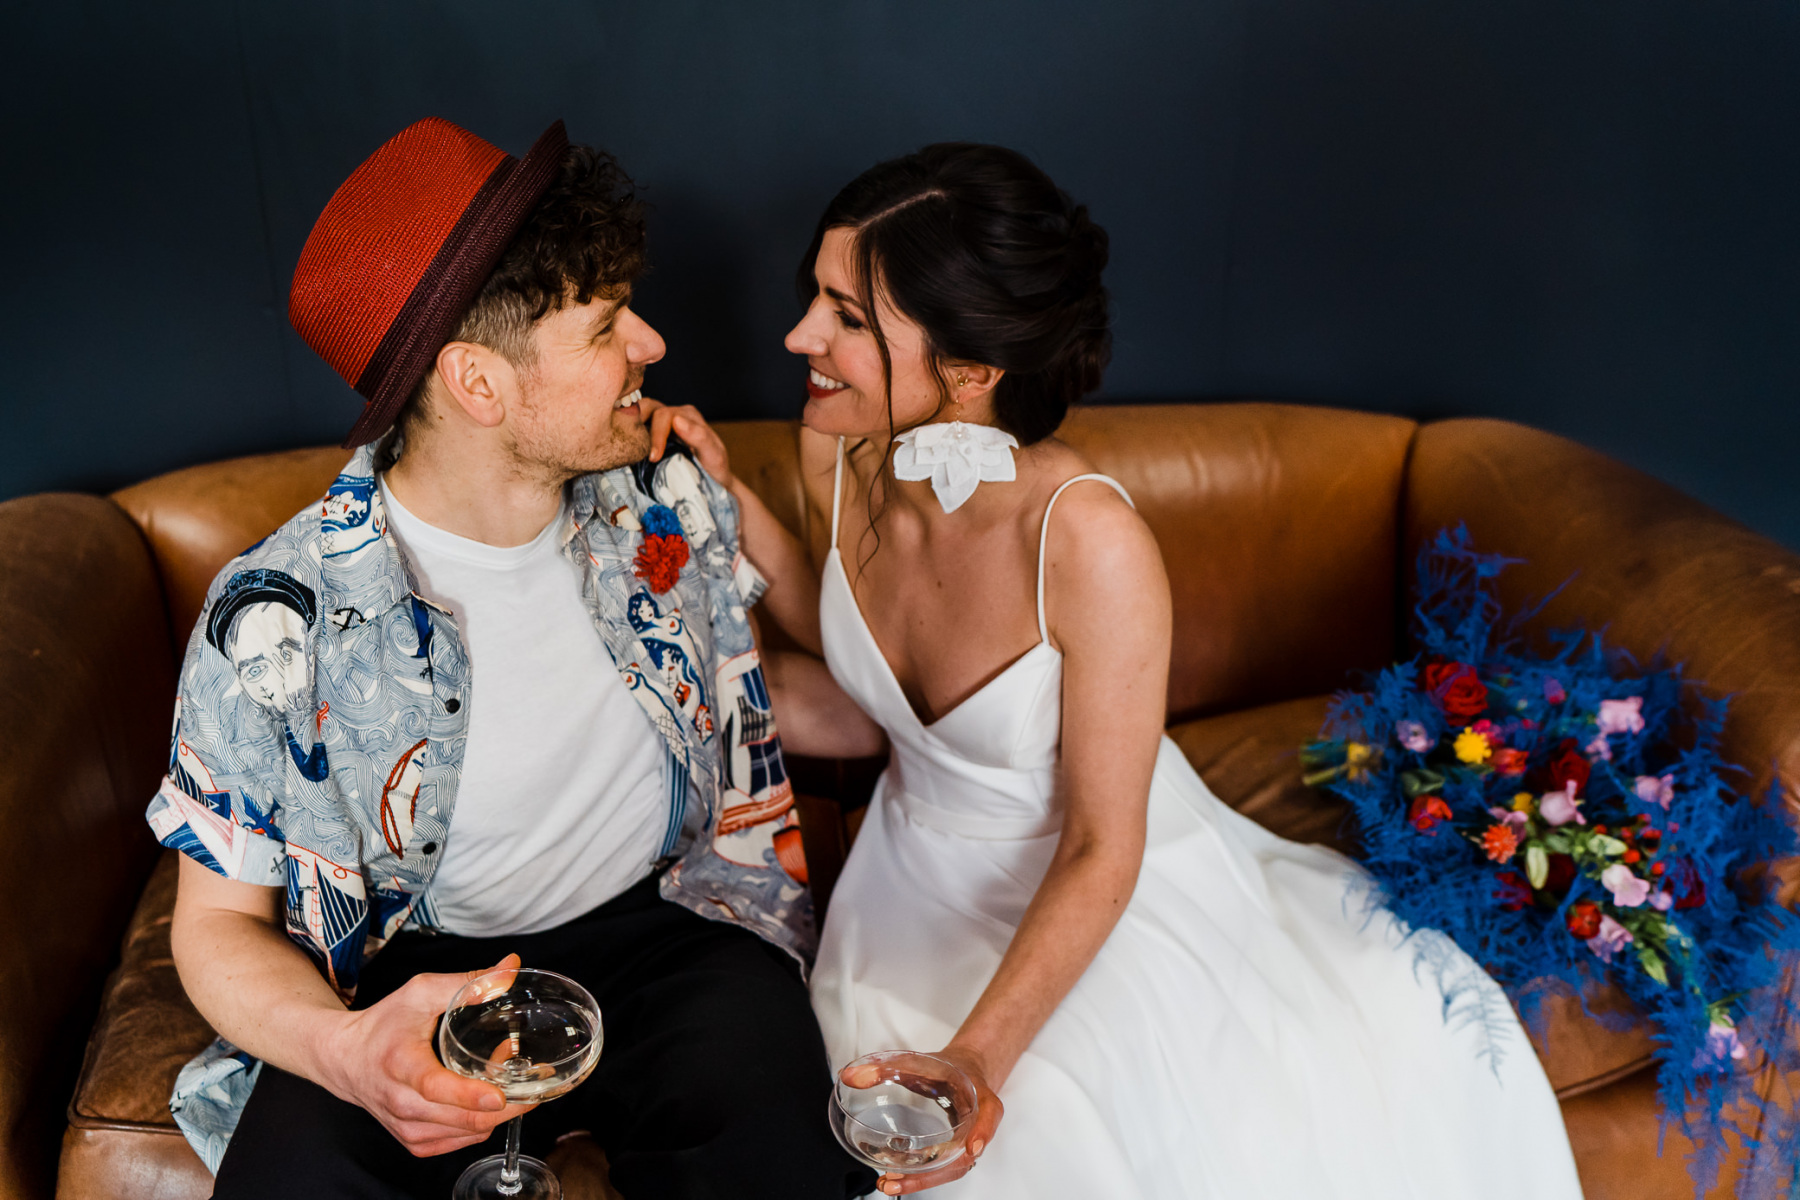 The groom was wearing black pants, a colorful printed shirt, a white tee and a red hat